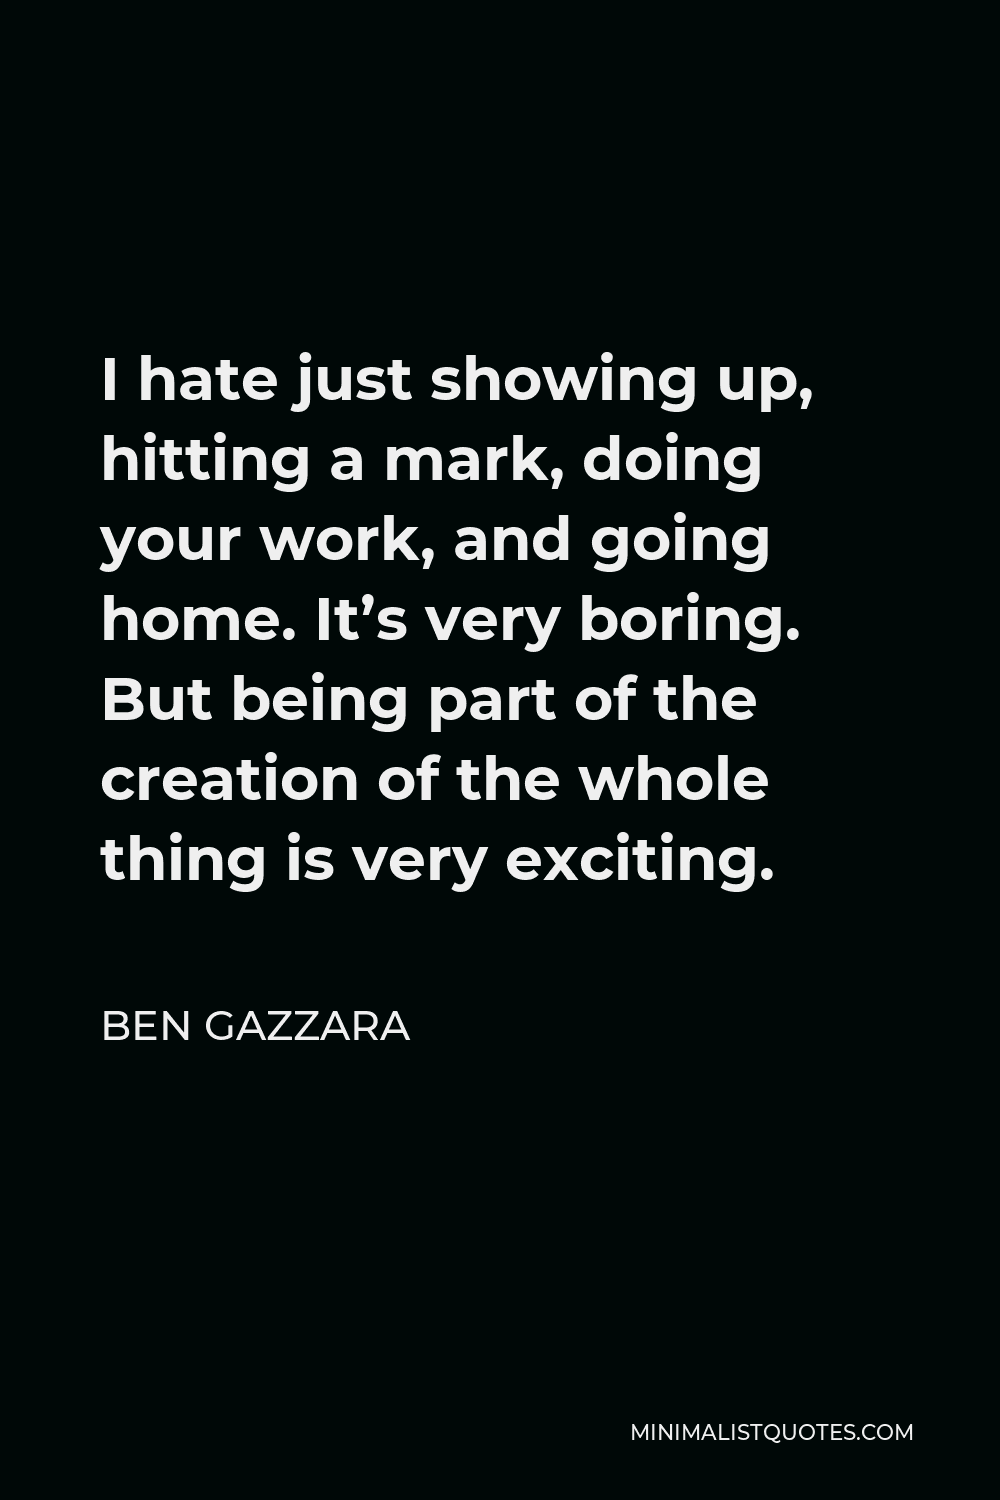 Ben Gazzara Quote - I hate just showing up, hitting a mark, doing your work, and going home. It’s very boring. But being part of the creation of the whole thing is very exciting.